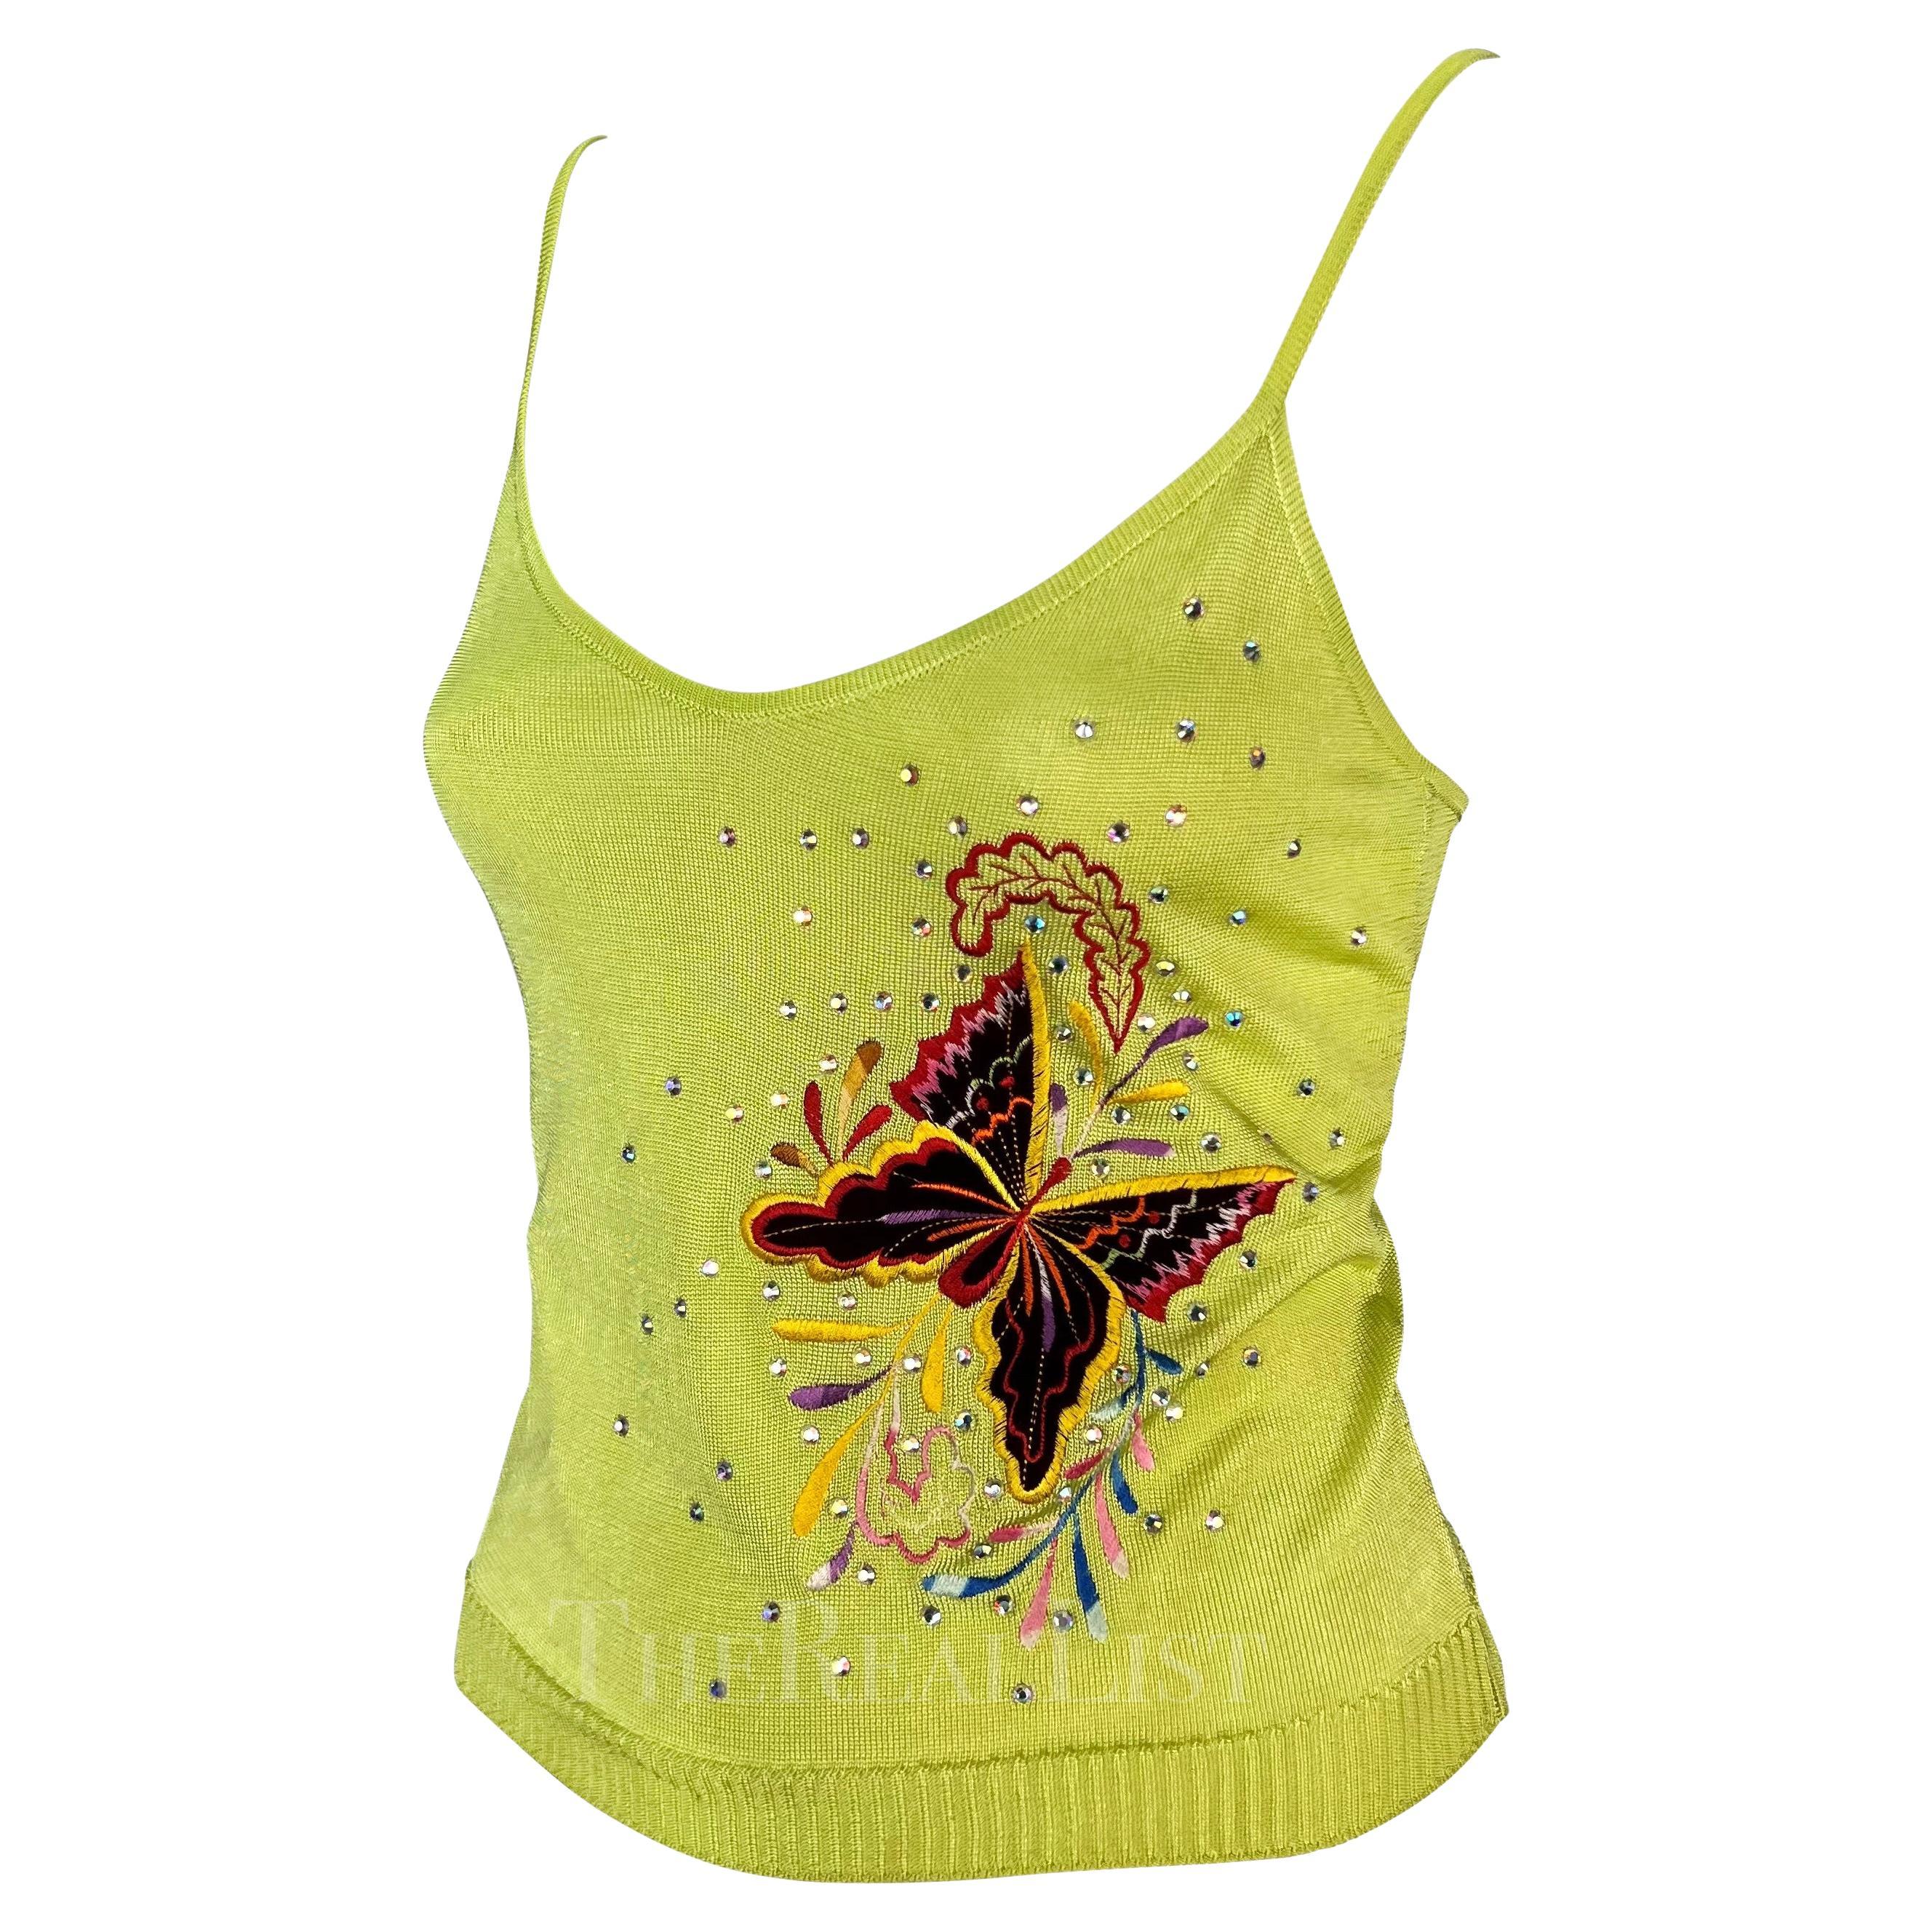 S/S 2002 Christian Dior by John Galliano Butterfly Embellished Knit Tank Top 